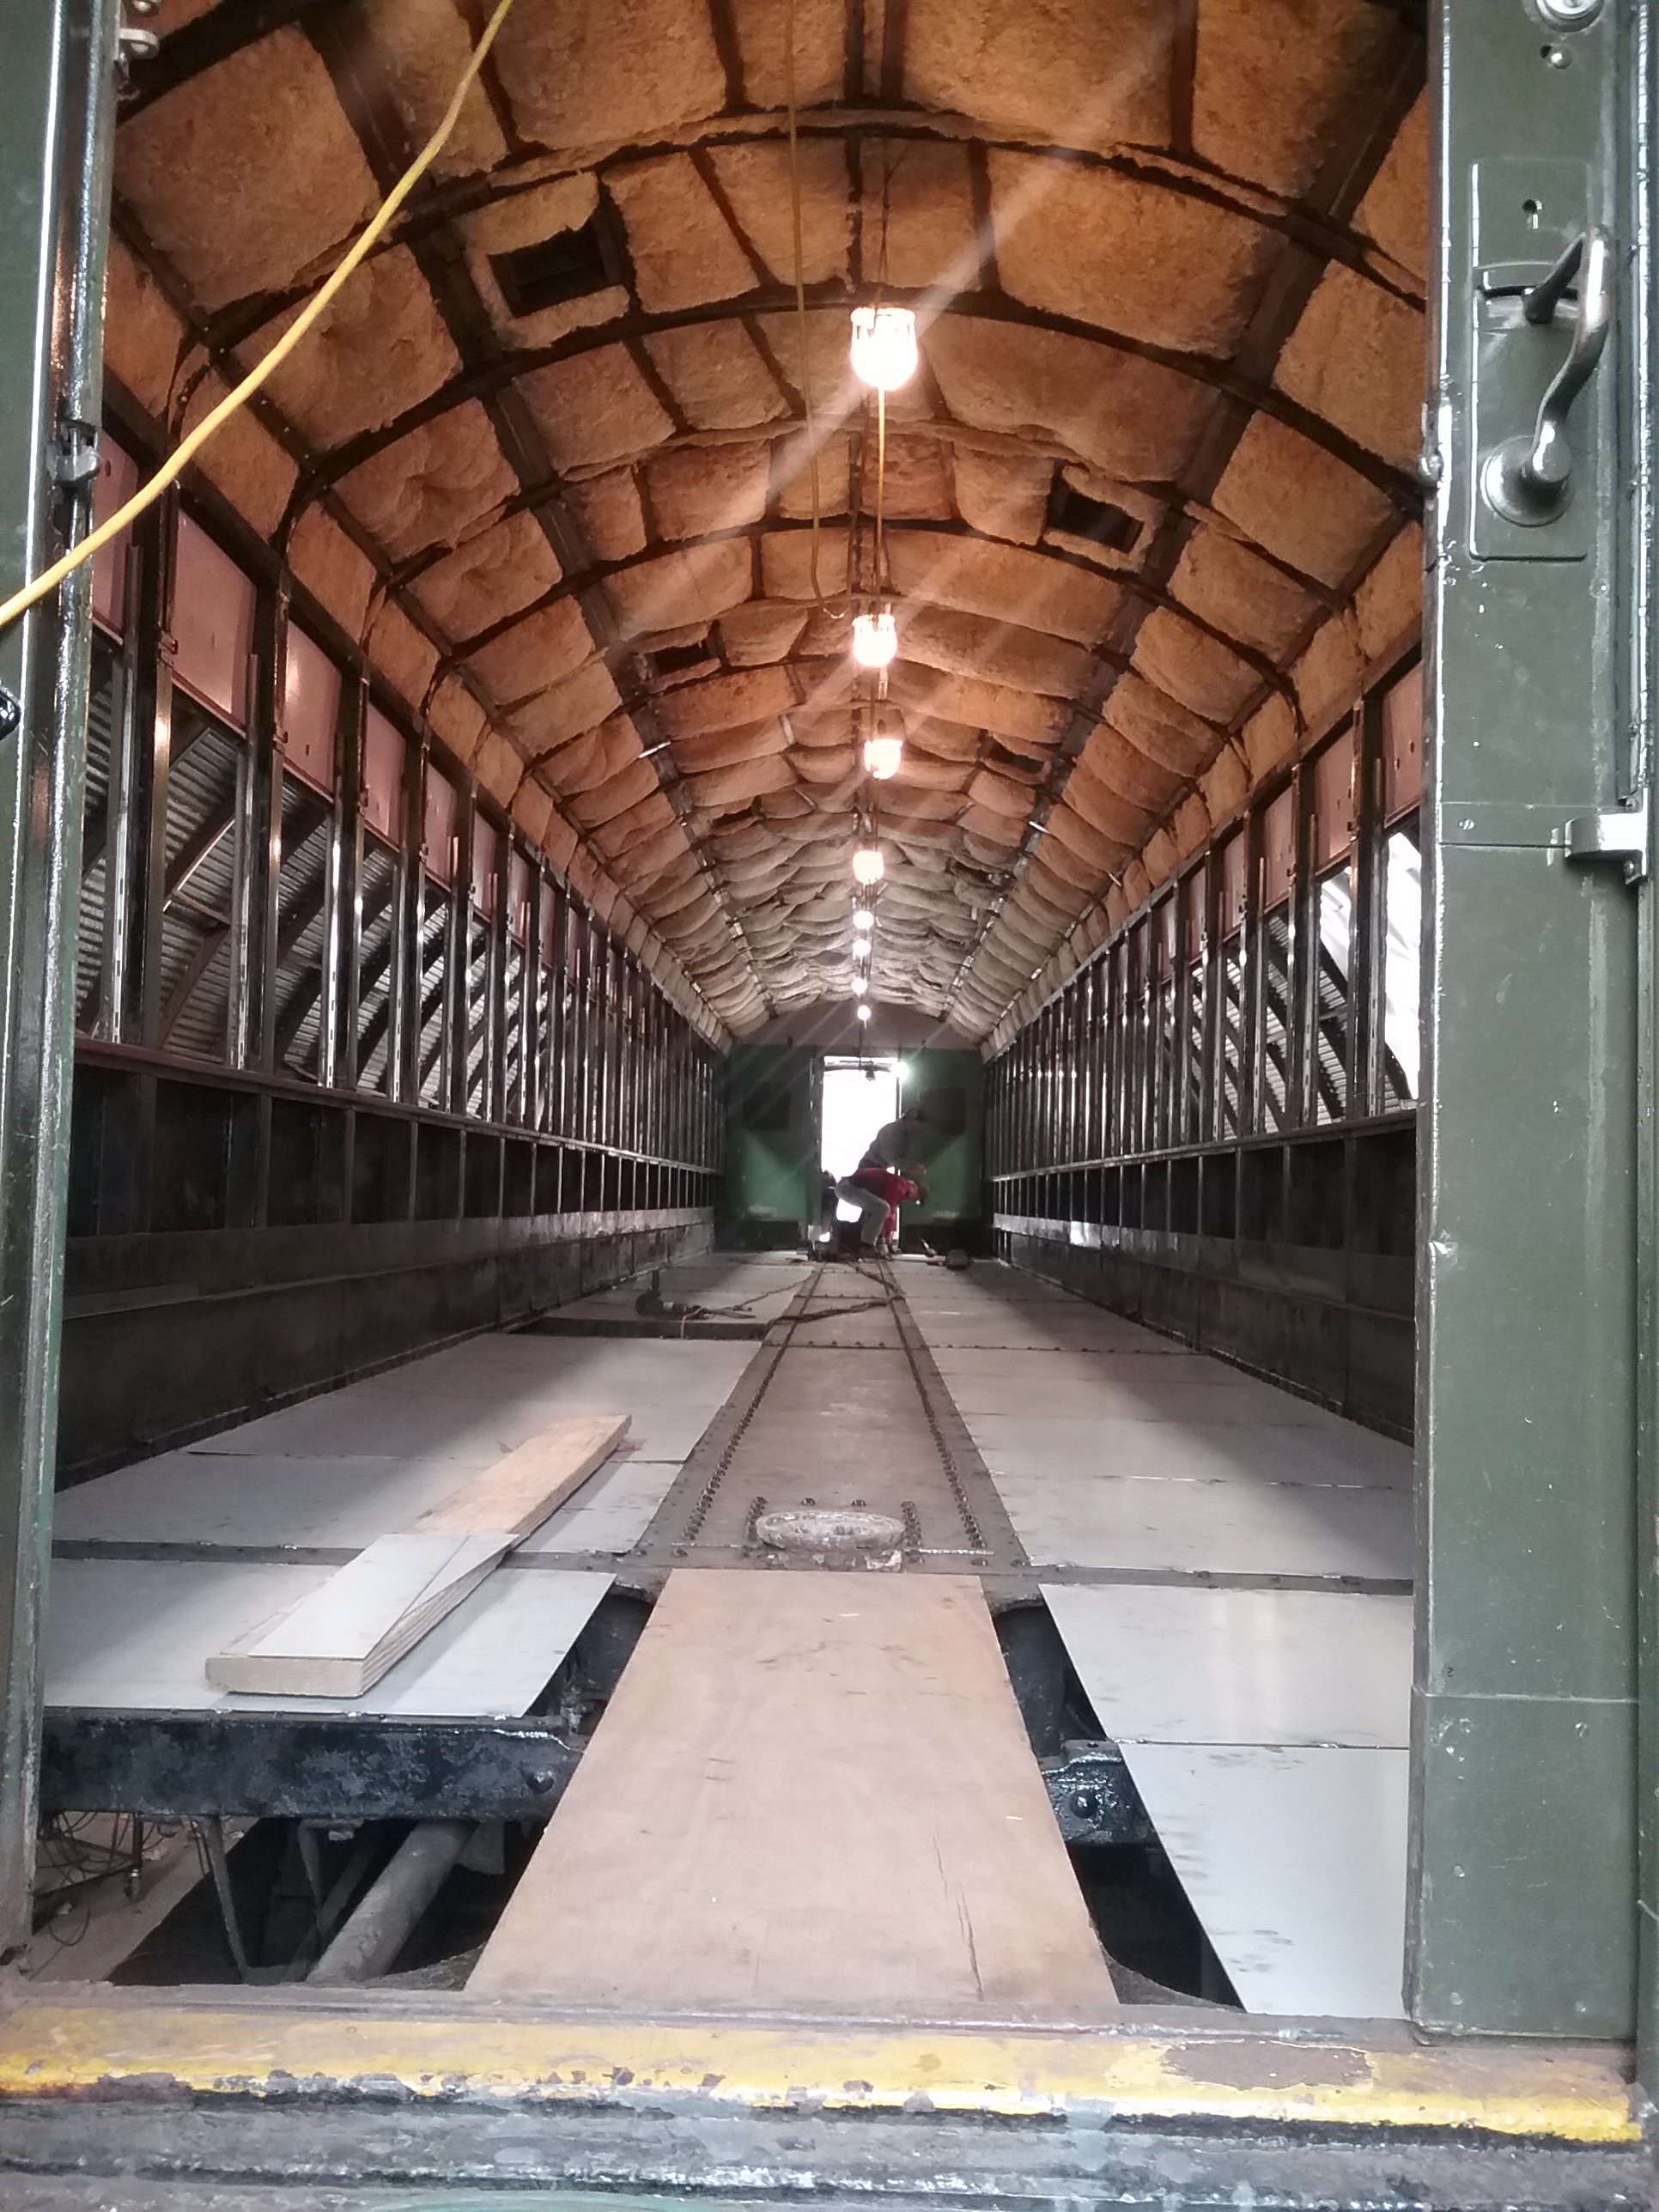  Once the floor was demolished, a new steel floor pan was installed, and then new wood stringers and insulation were added before the new floor was installed. 